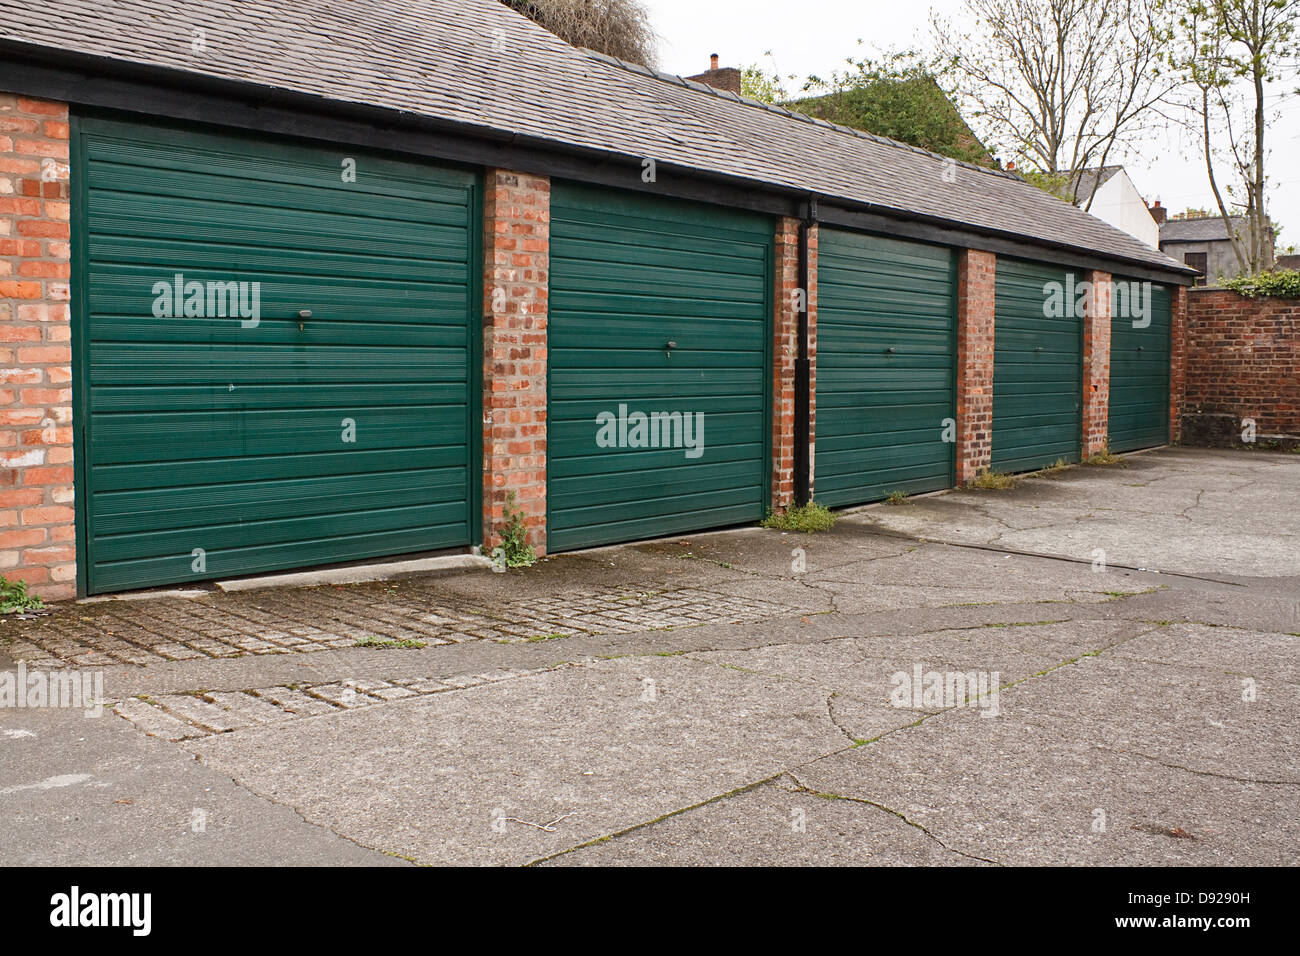 Residential garage block available to rent or lease often used for storage Stock Photo